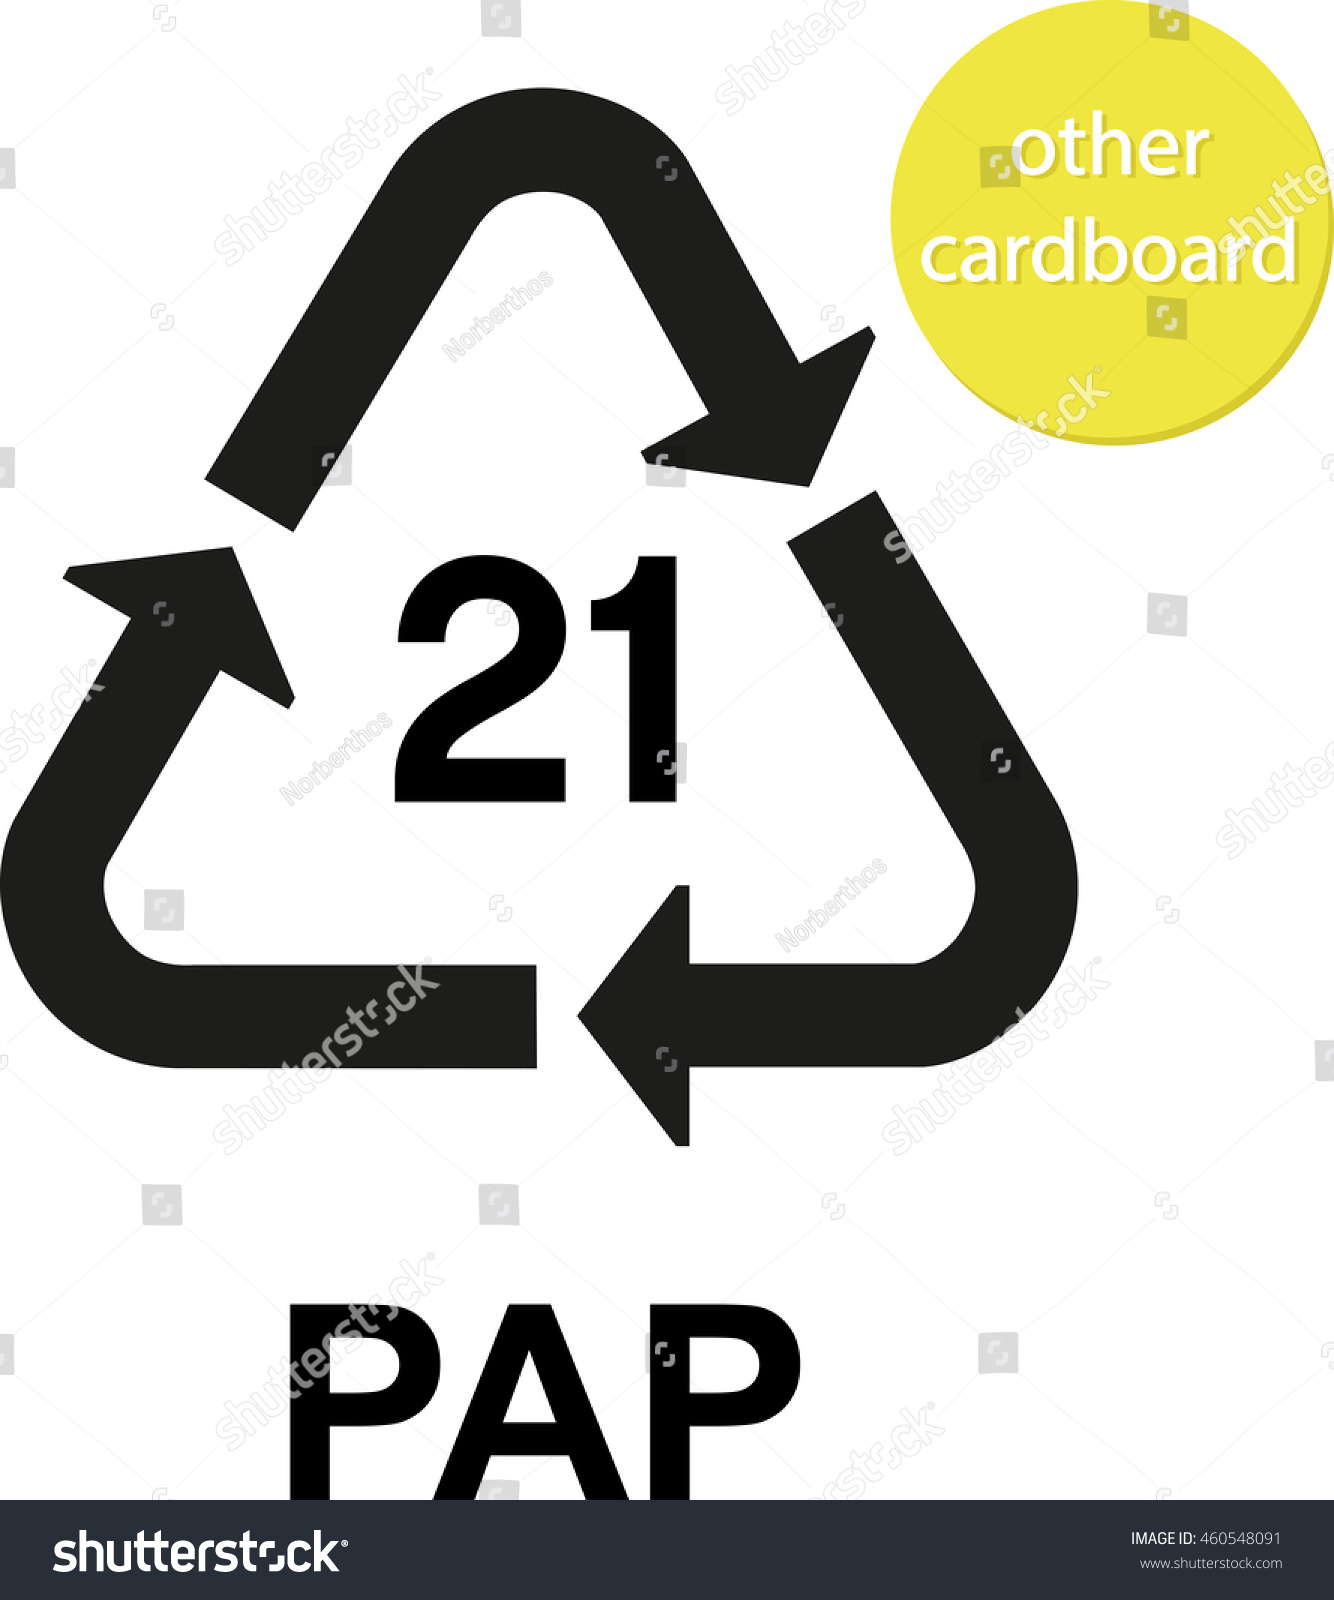 SVG of PAP other cardboard recycling code svg